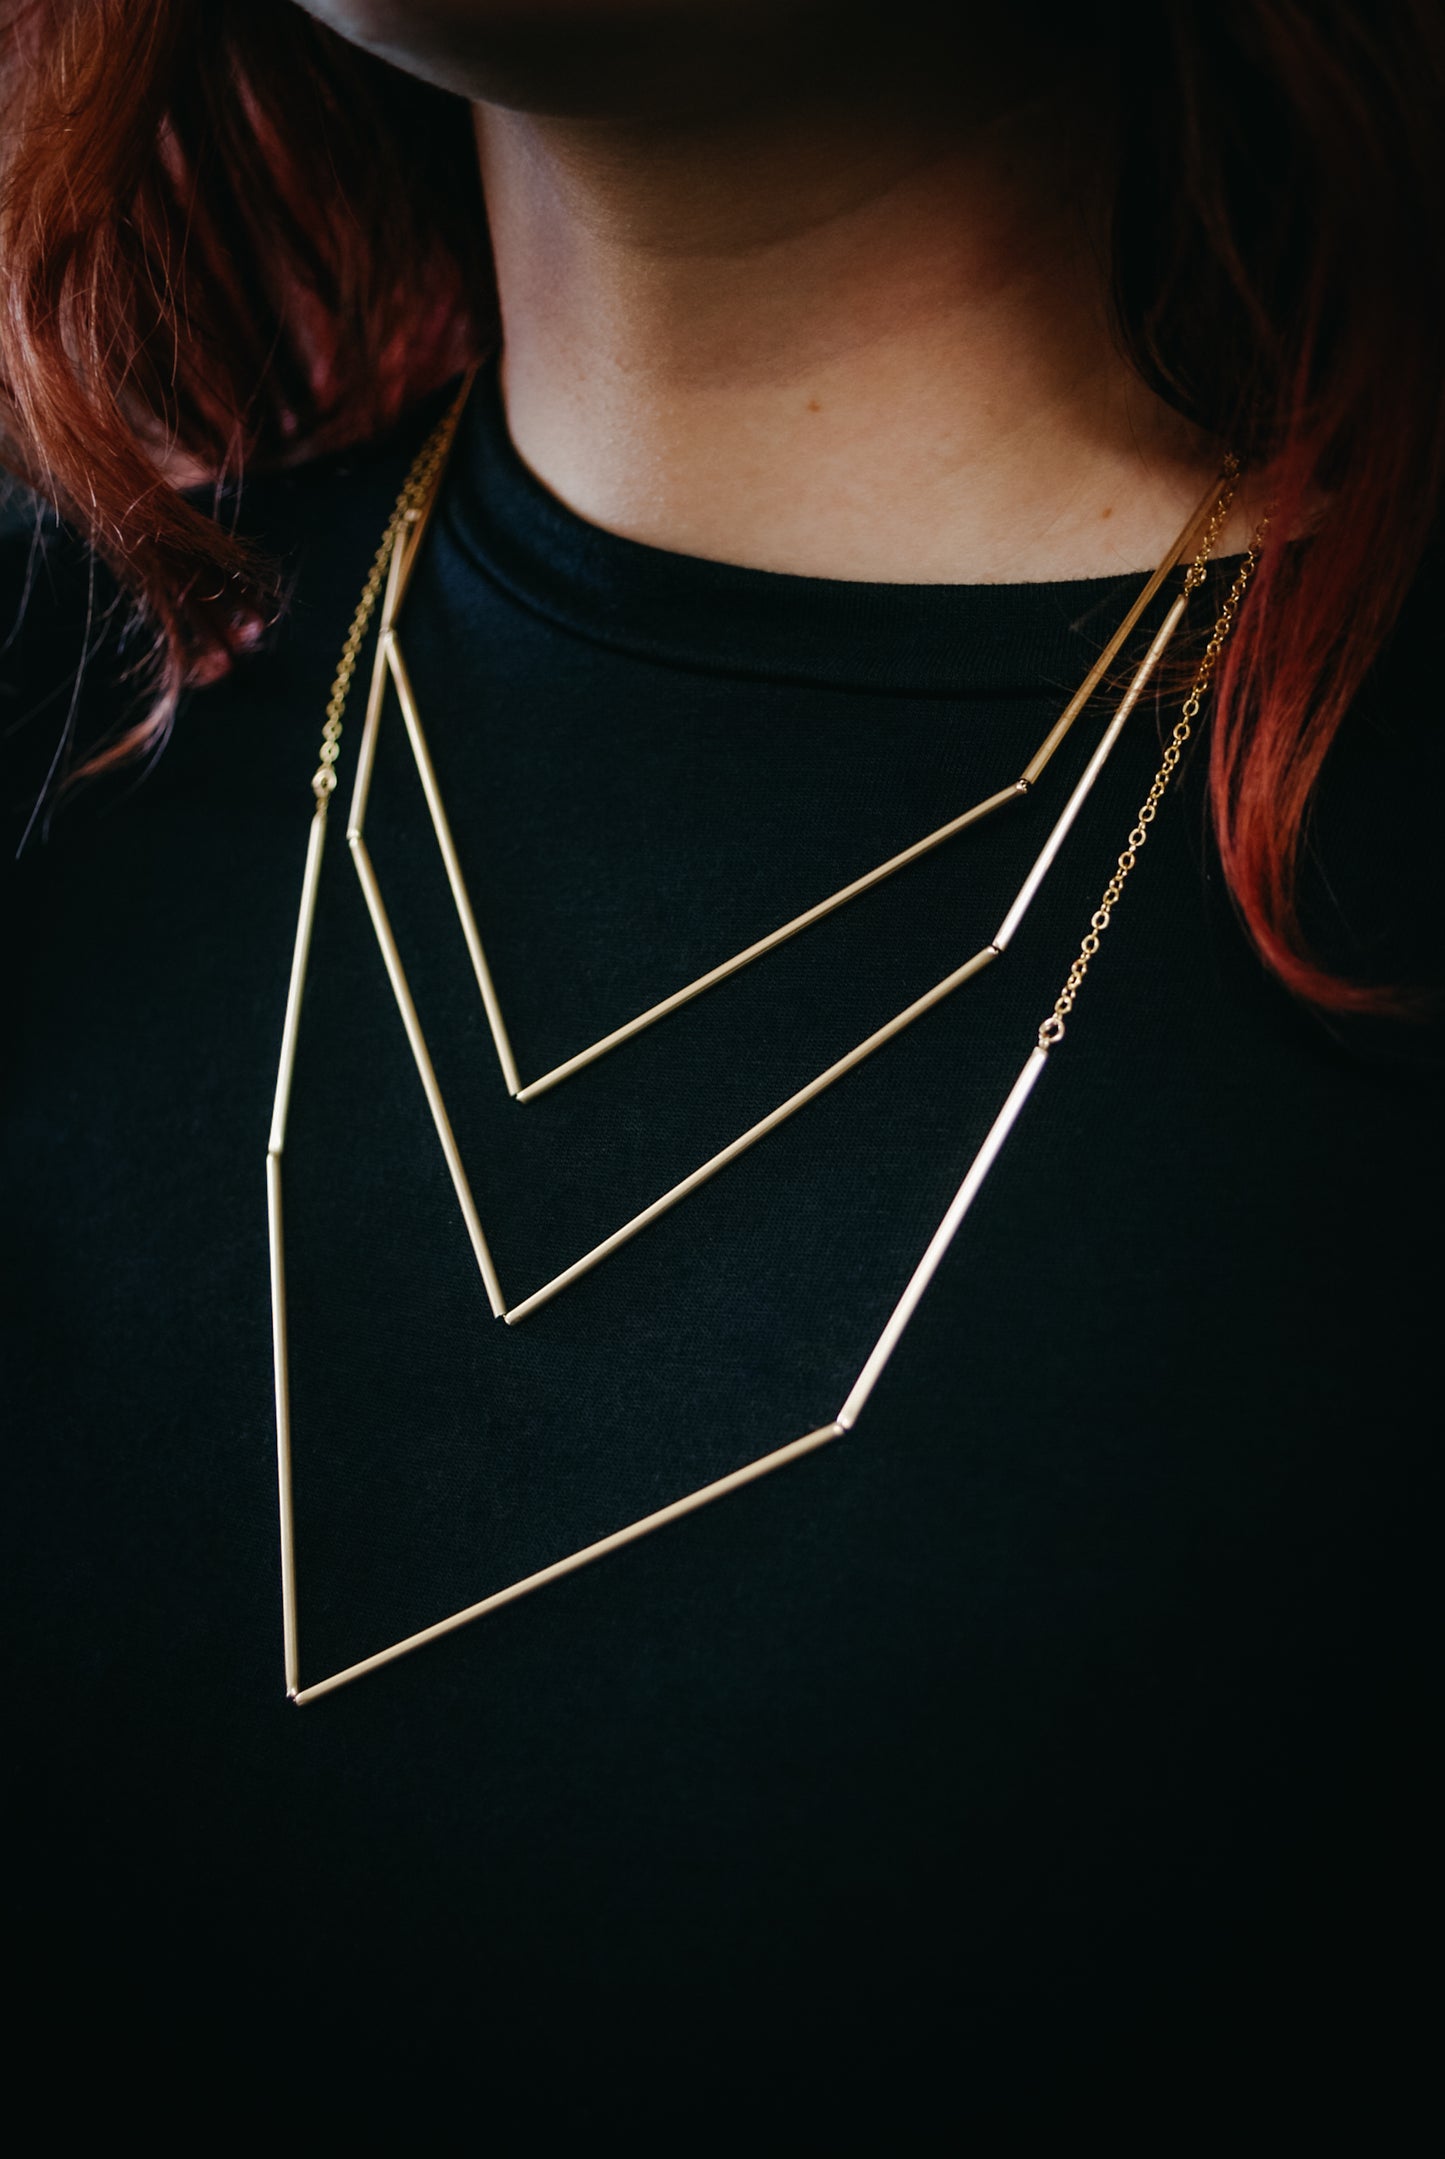 Geo Necklace, Gold Fill, Rose Gold Fill or Sterling Silver